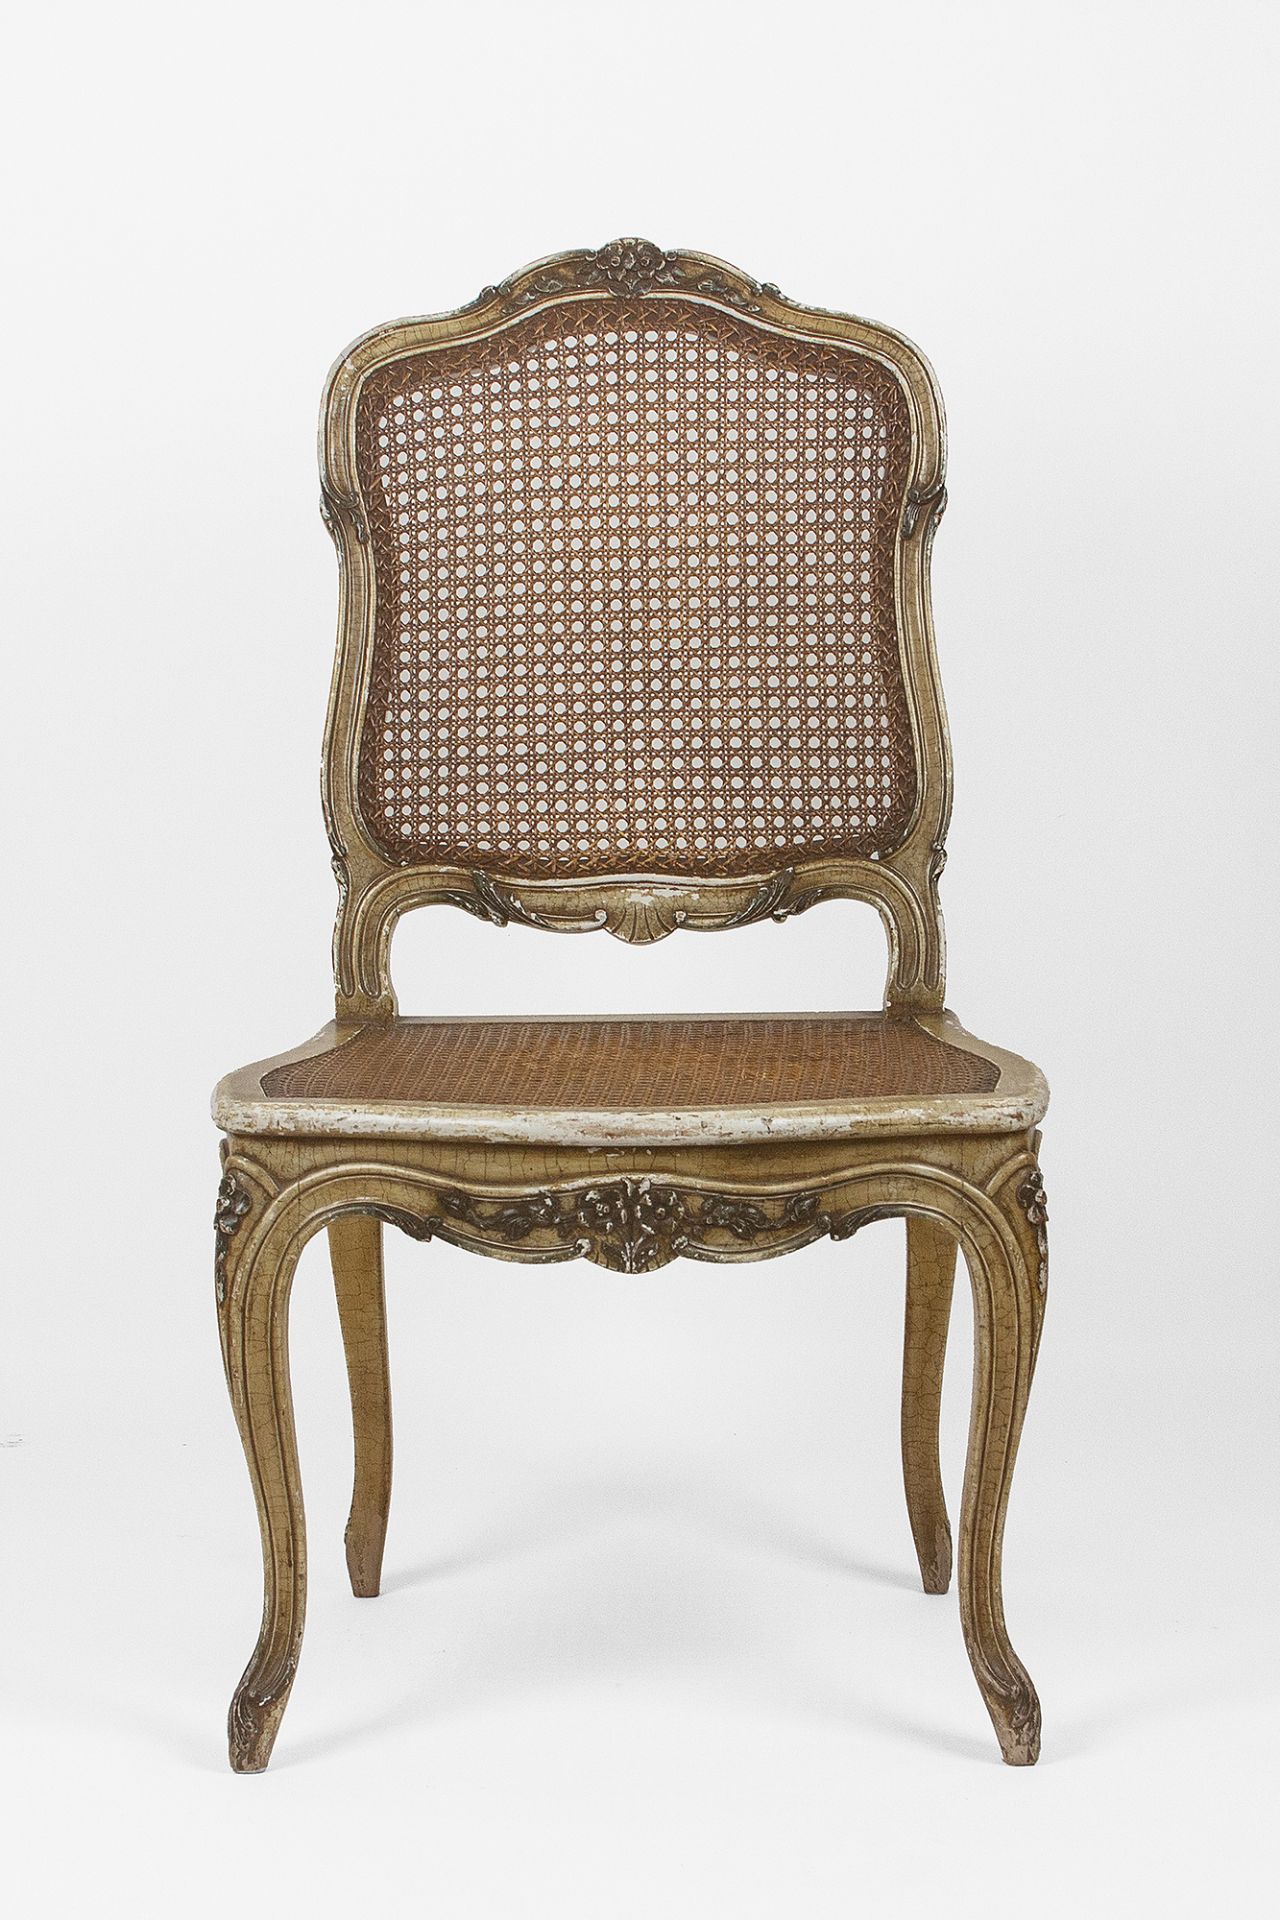 A first half of 20th century pairof Louis XVI style chairs - Image 2 of 3